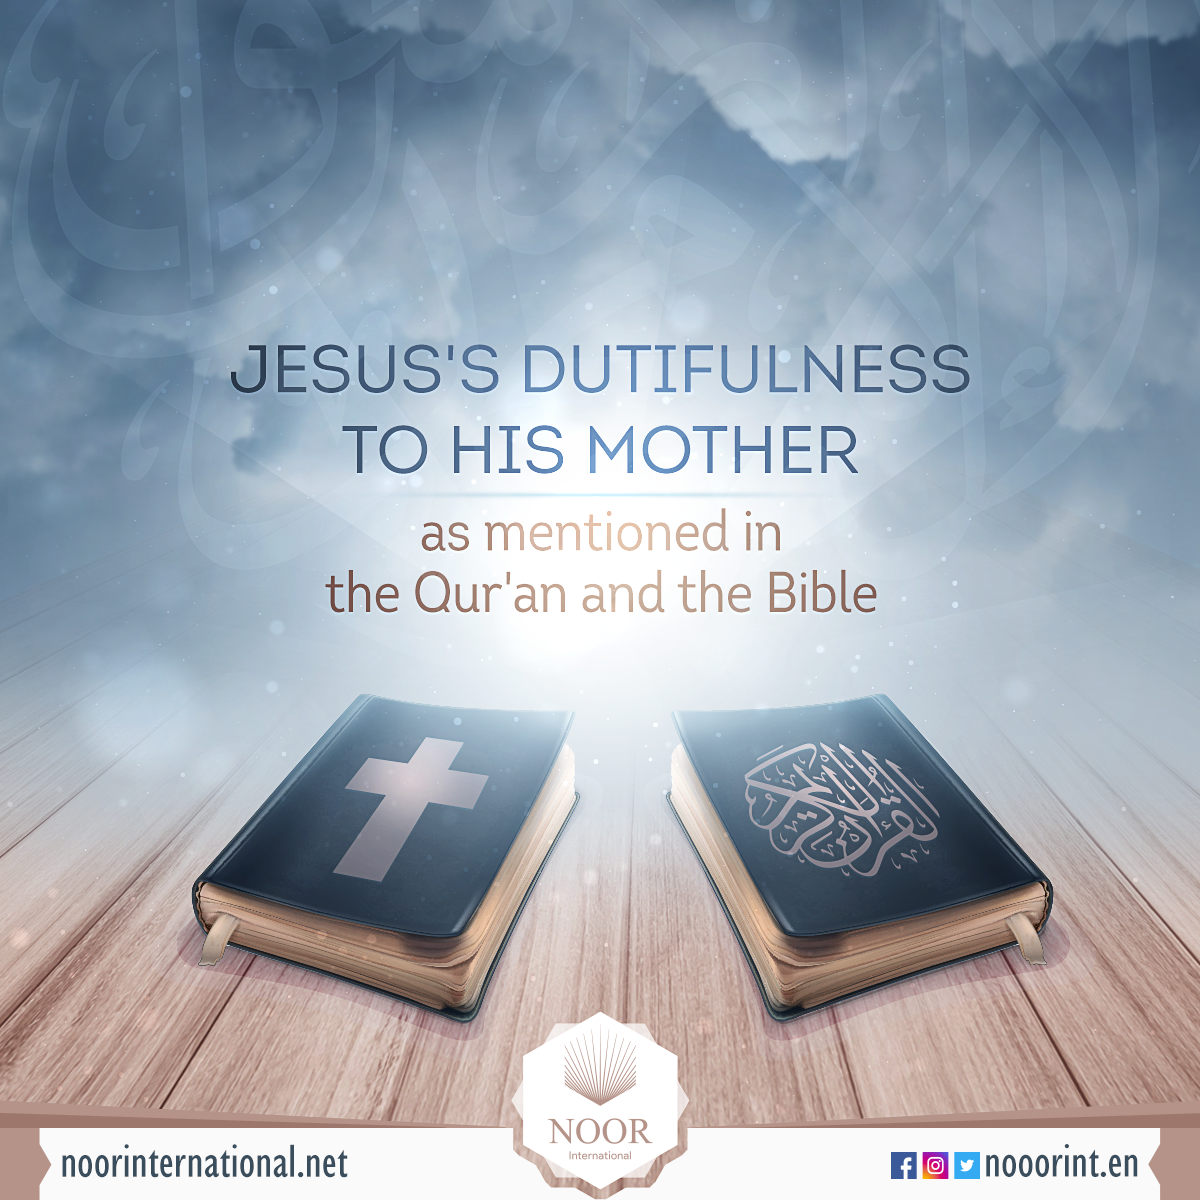 The Christ's dutifulness to his mother as mentioned in the Qur'an and the Bible